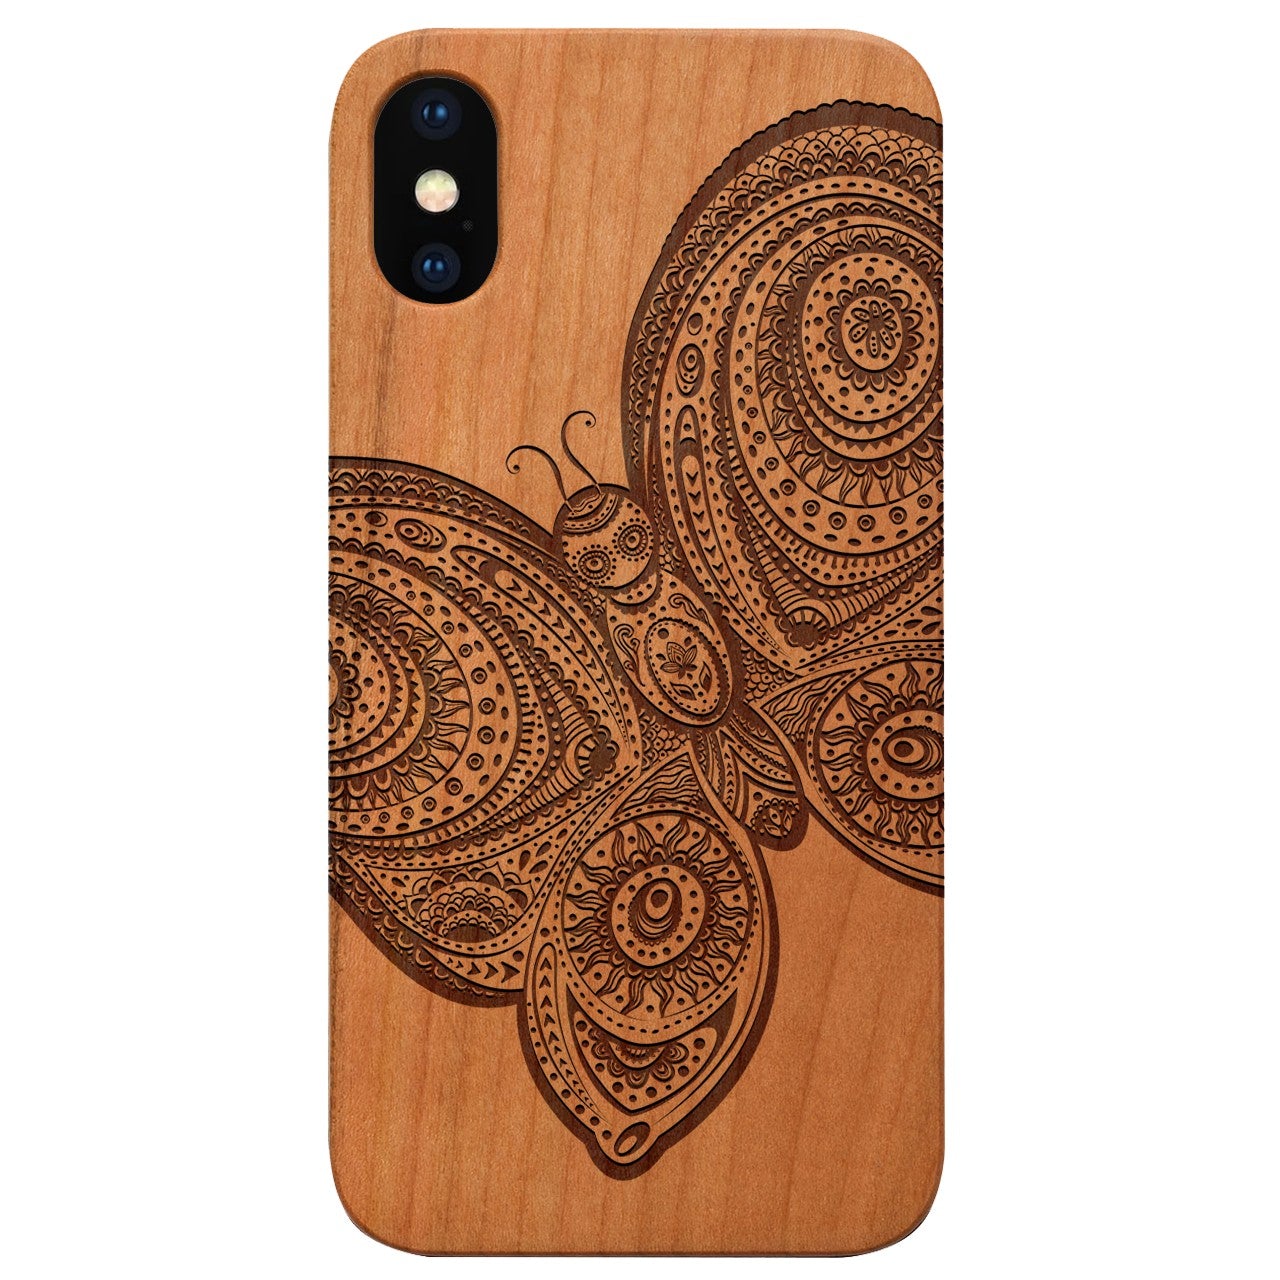  Butterfly 3 - Engraved - Wooden Phone Case - IPhone 13 Models